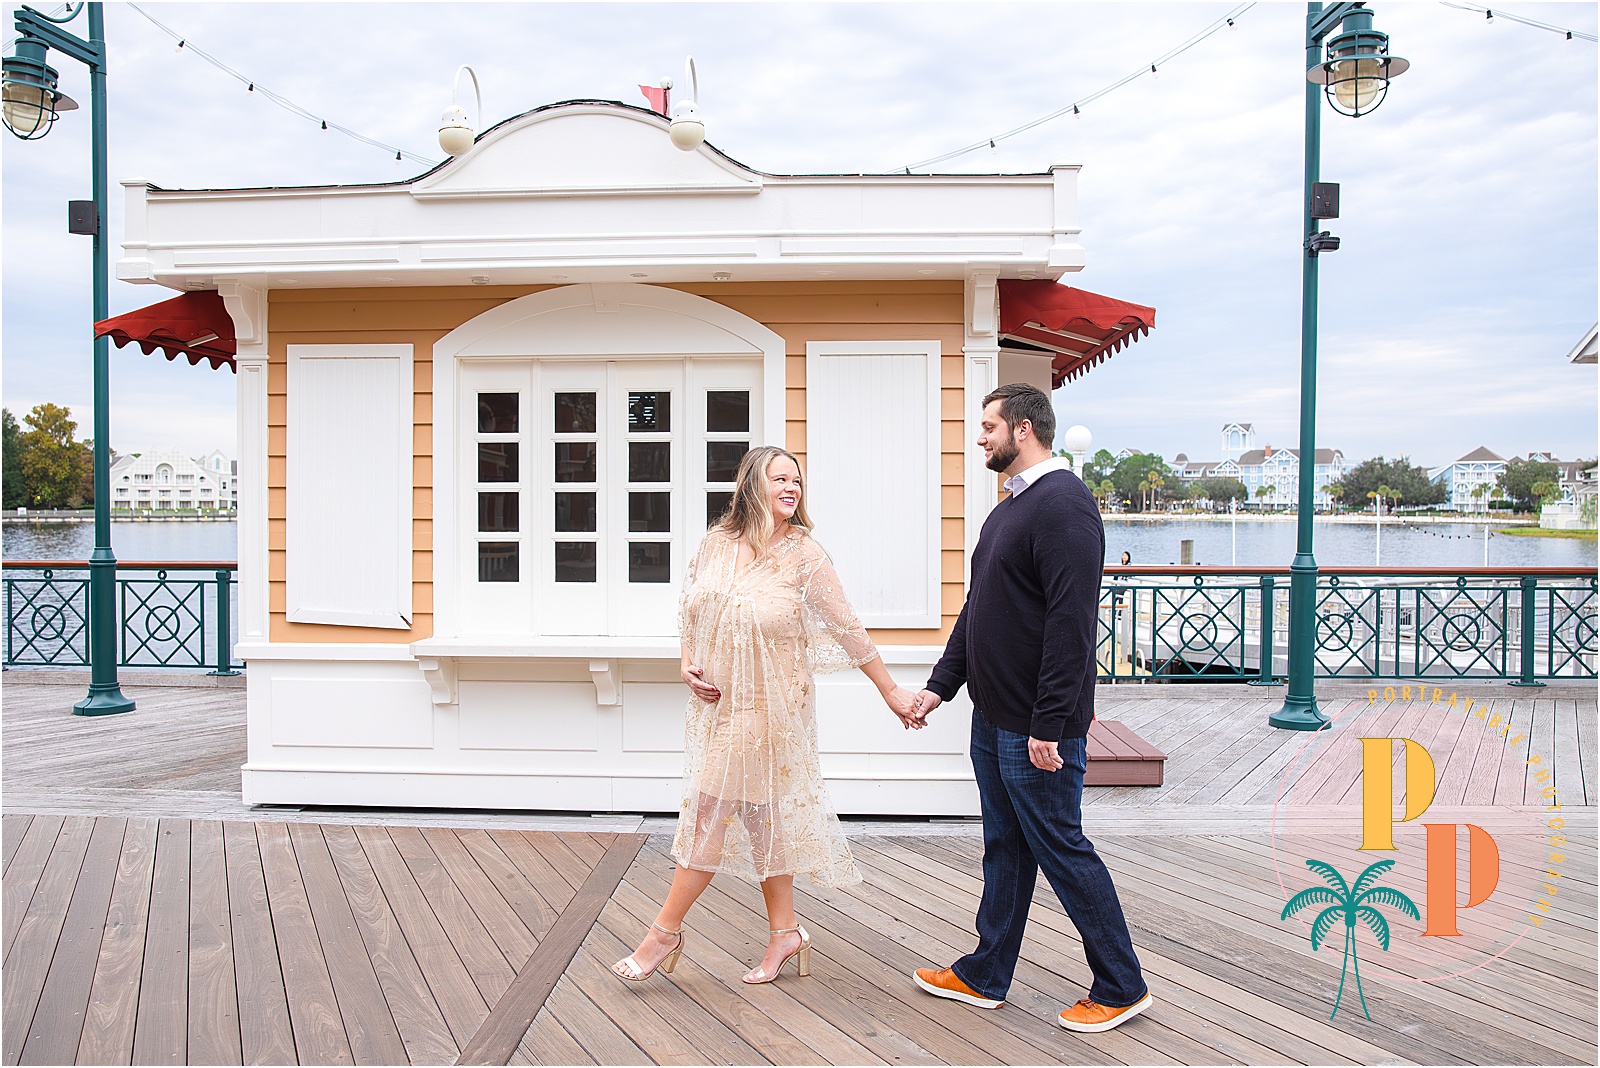 Capturing the beauty of pregnancy, this maternity portrait at Disney's BoardWalk Resort radiates warmth and happiness, as the mom-to-be embraces the magical surroundings.